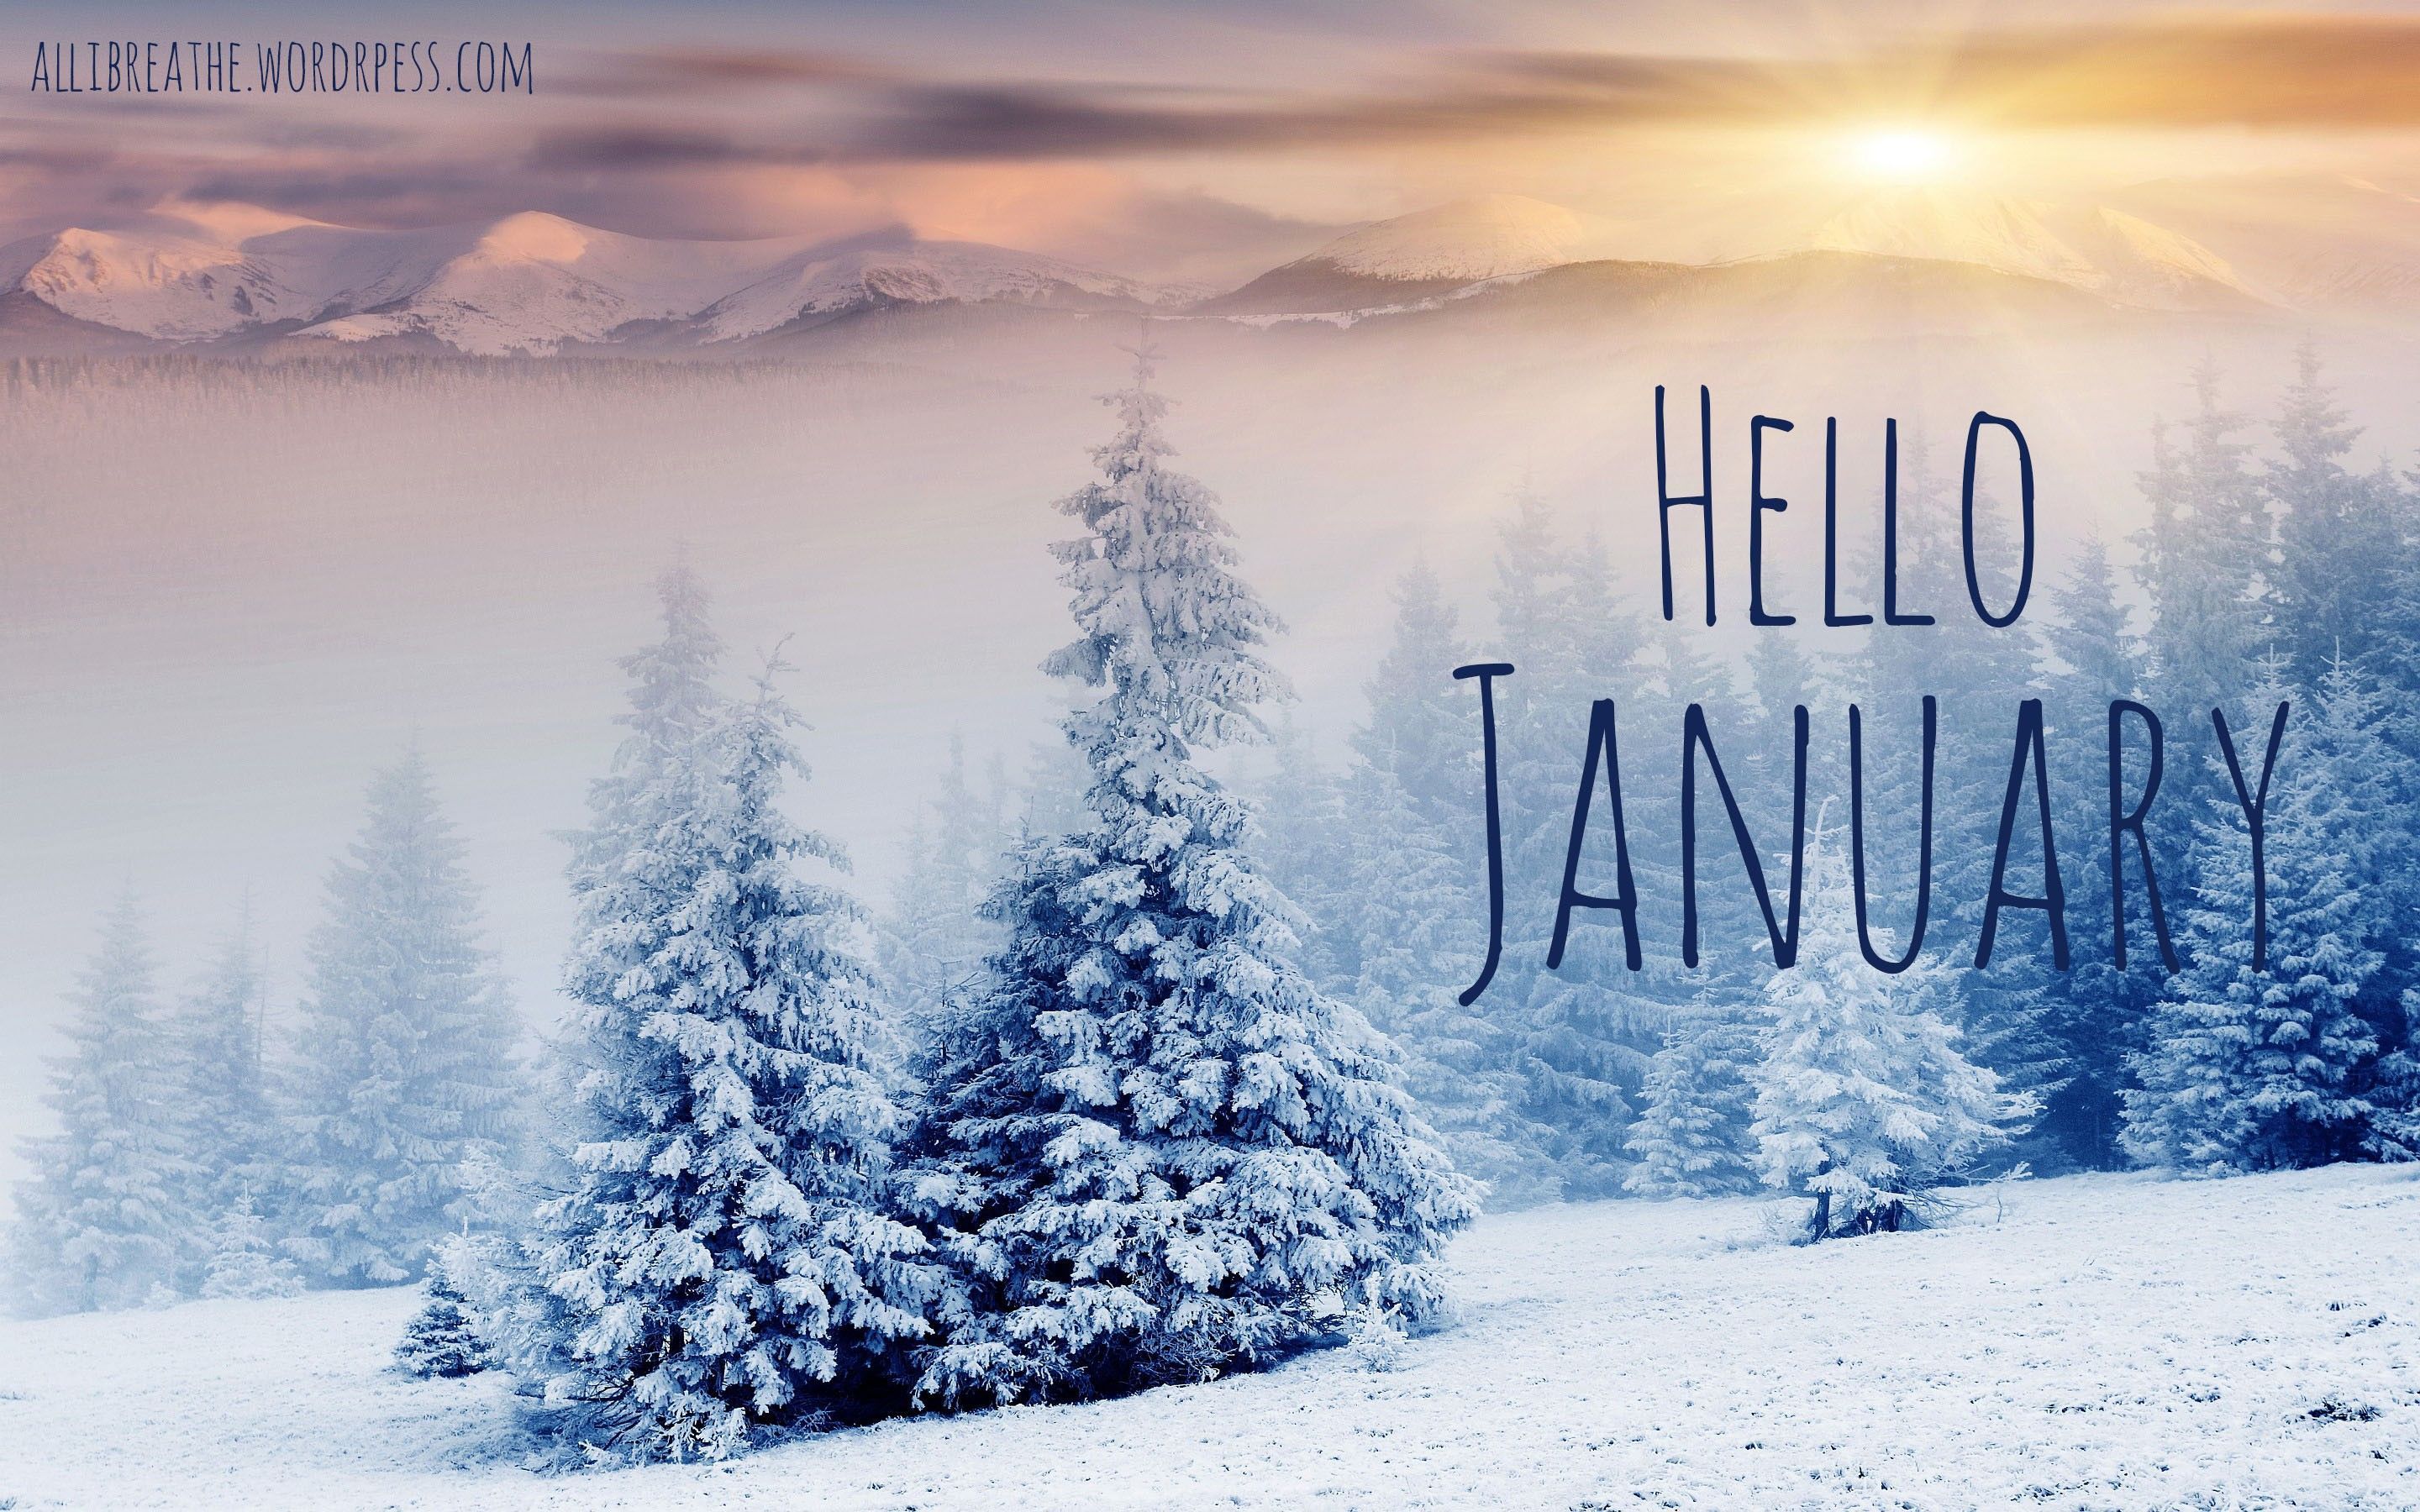 January wallpaper background free download for your devices